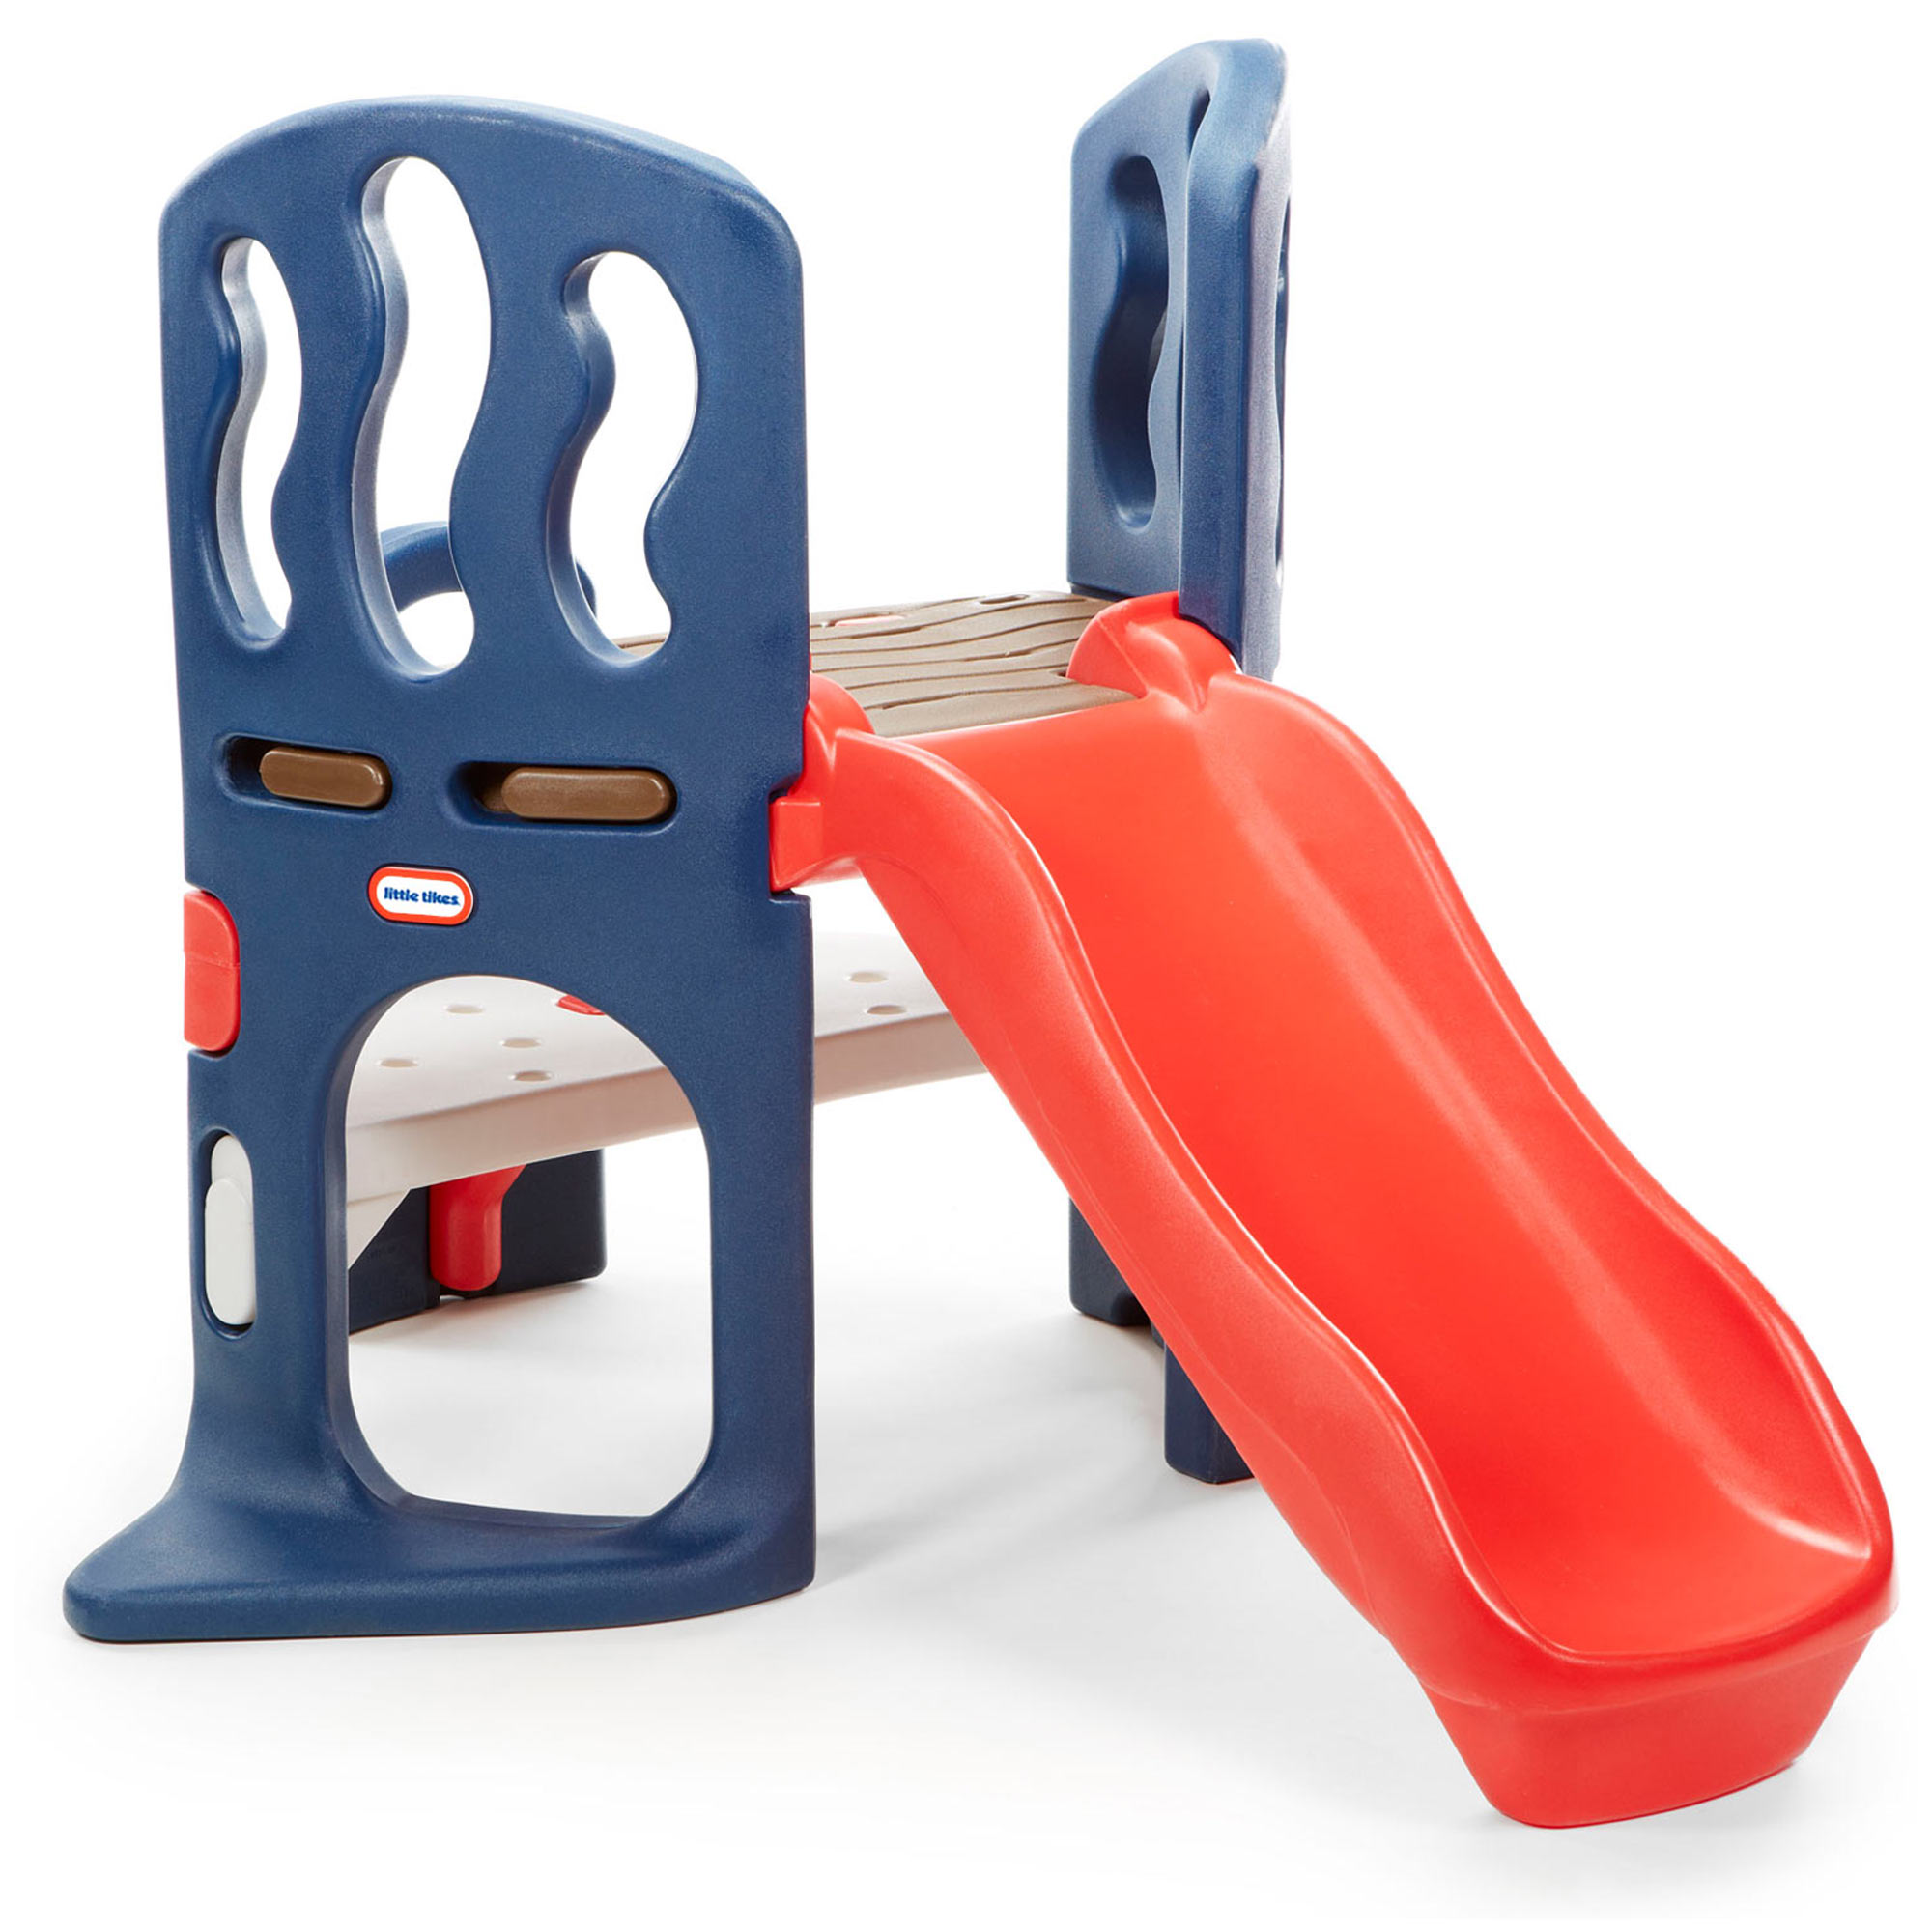 Little Tikes Hide & Slide Climber, Blue & Red - Climbing Toy and Slide for Kids Ages 2 to 6 - image 4 of 6